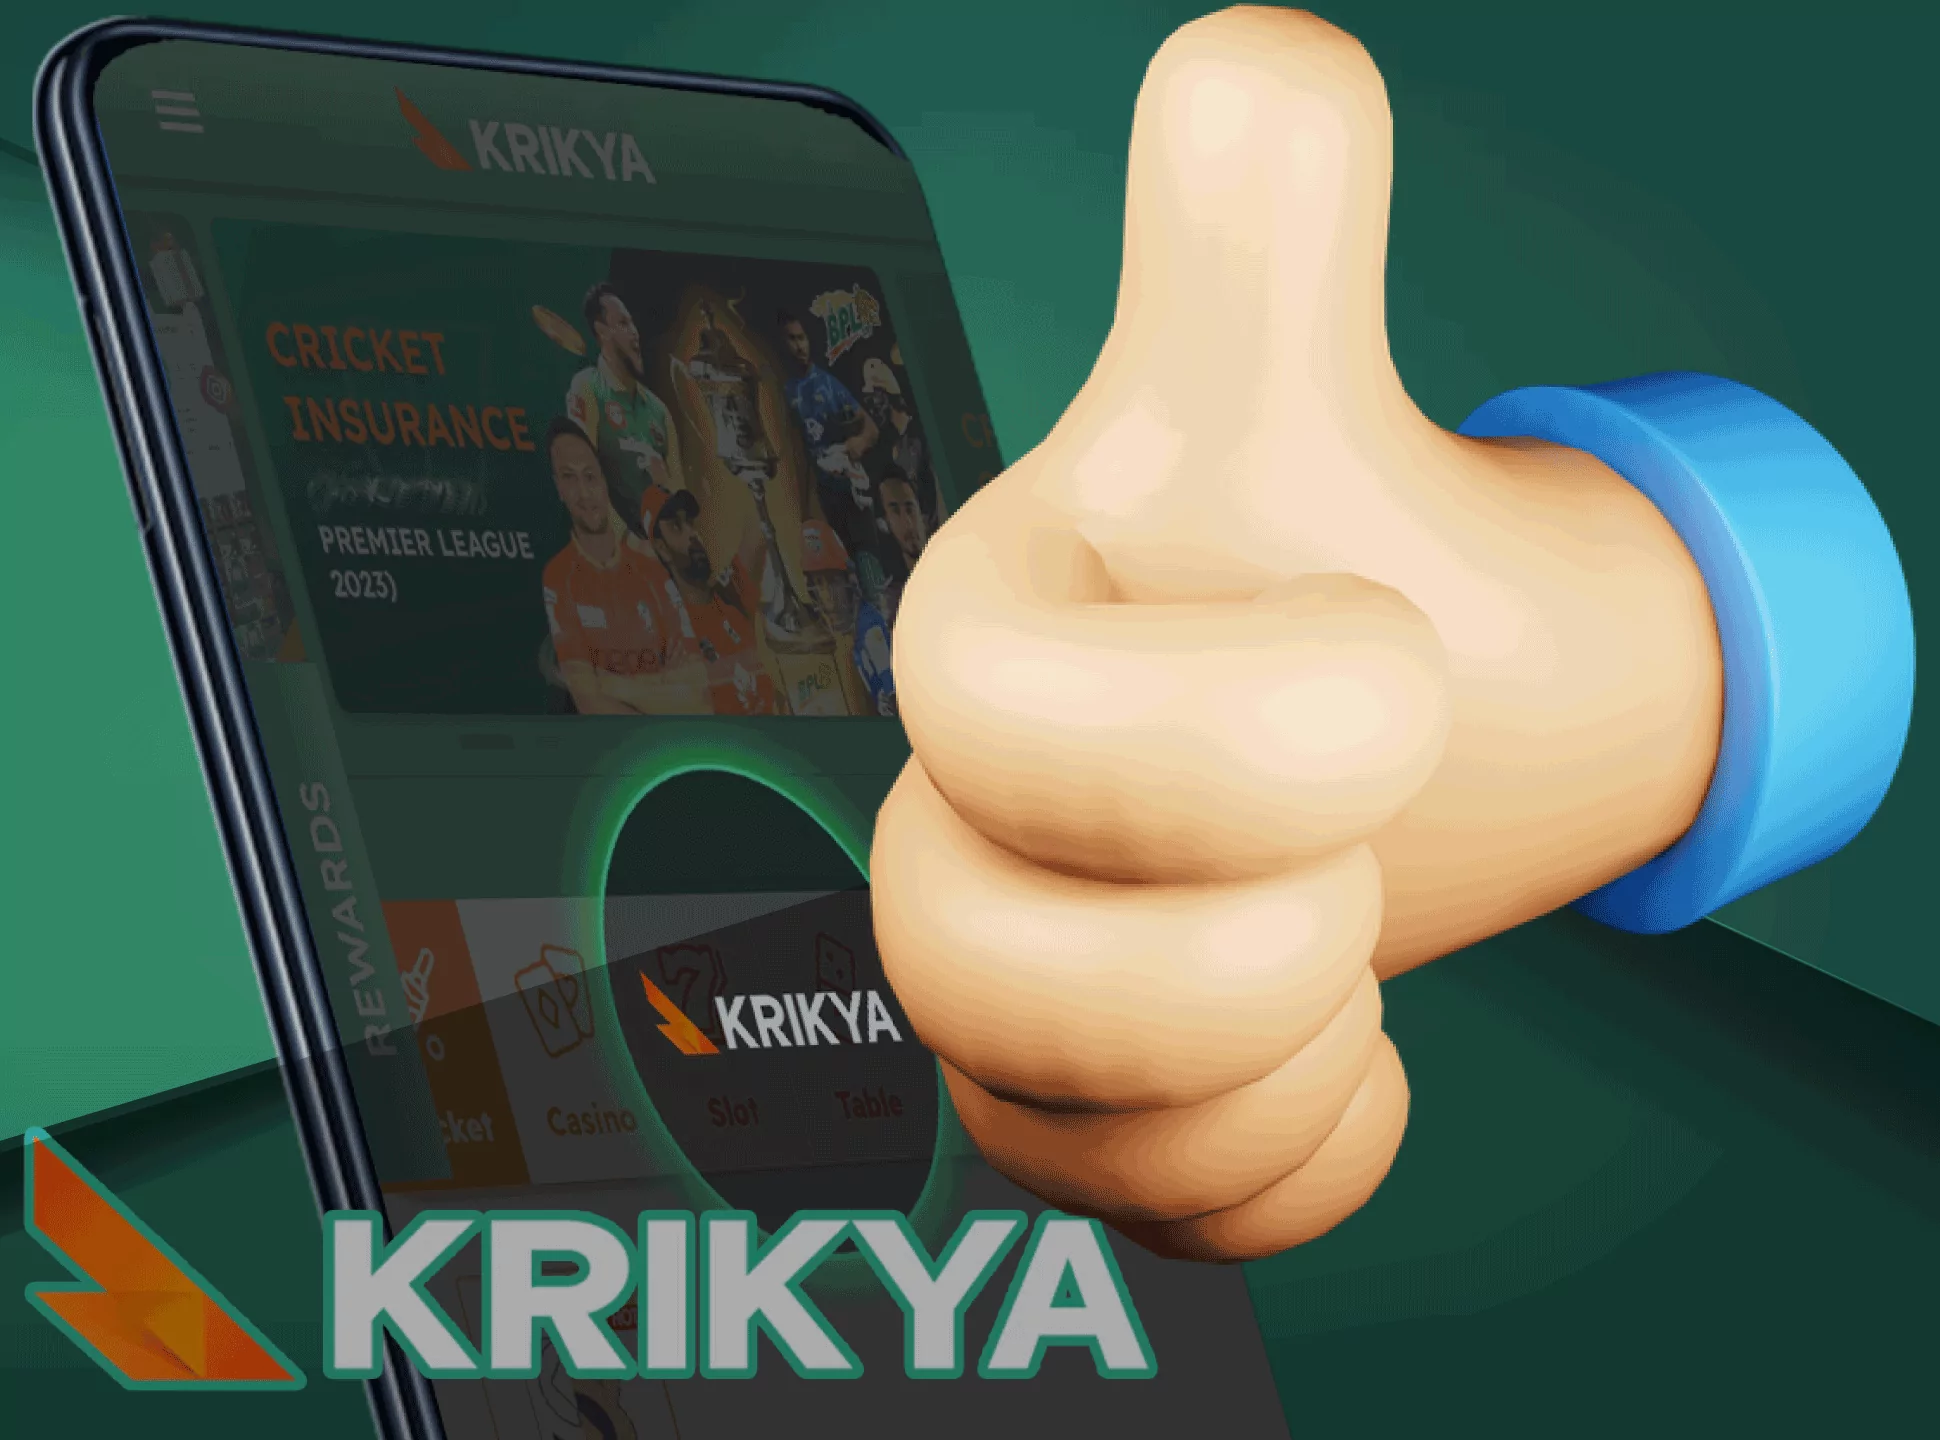 Download and install the Krikya app and place bets via your smartphone.